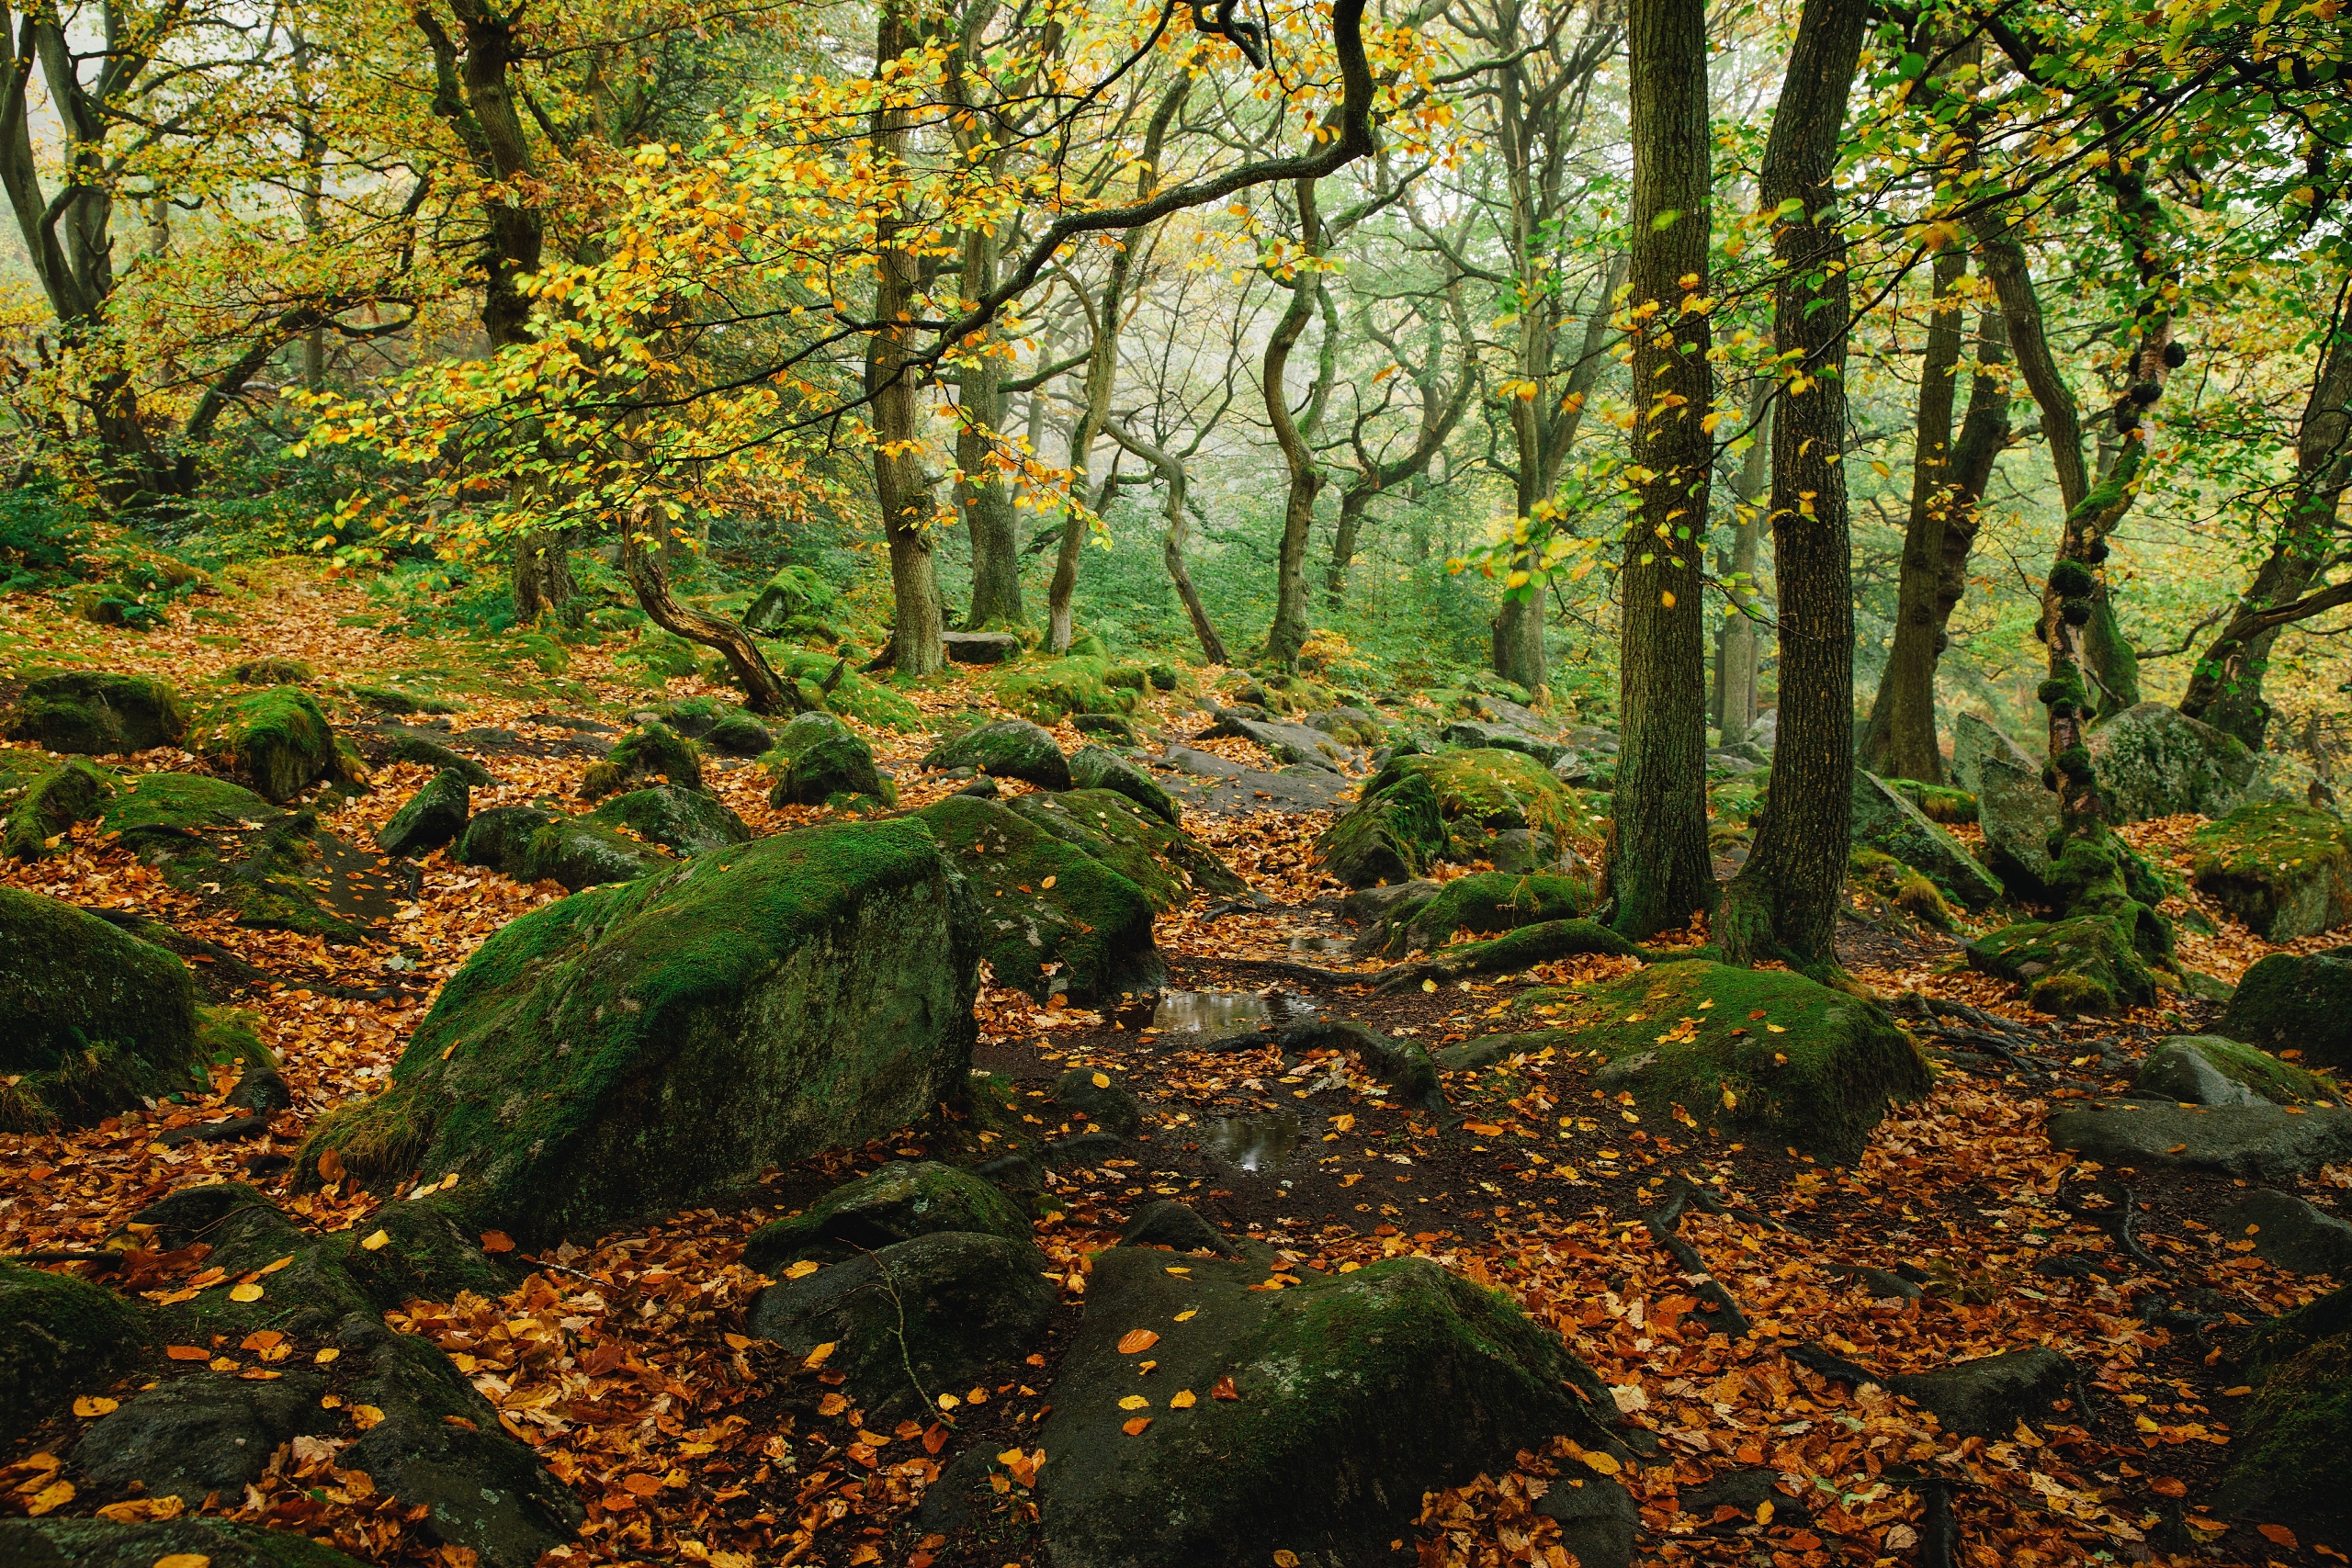 General 2560x1707 forest trees nature plants outdoors fall rocks fallen leaves